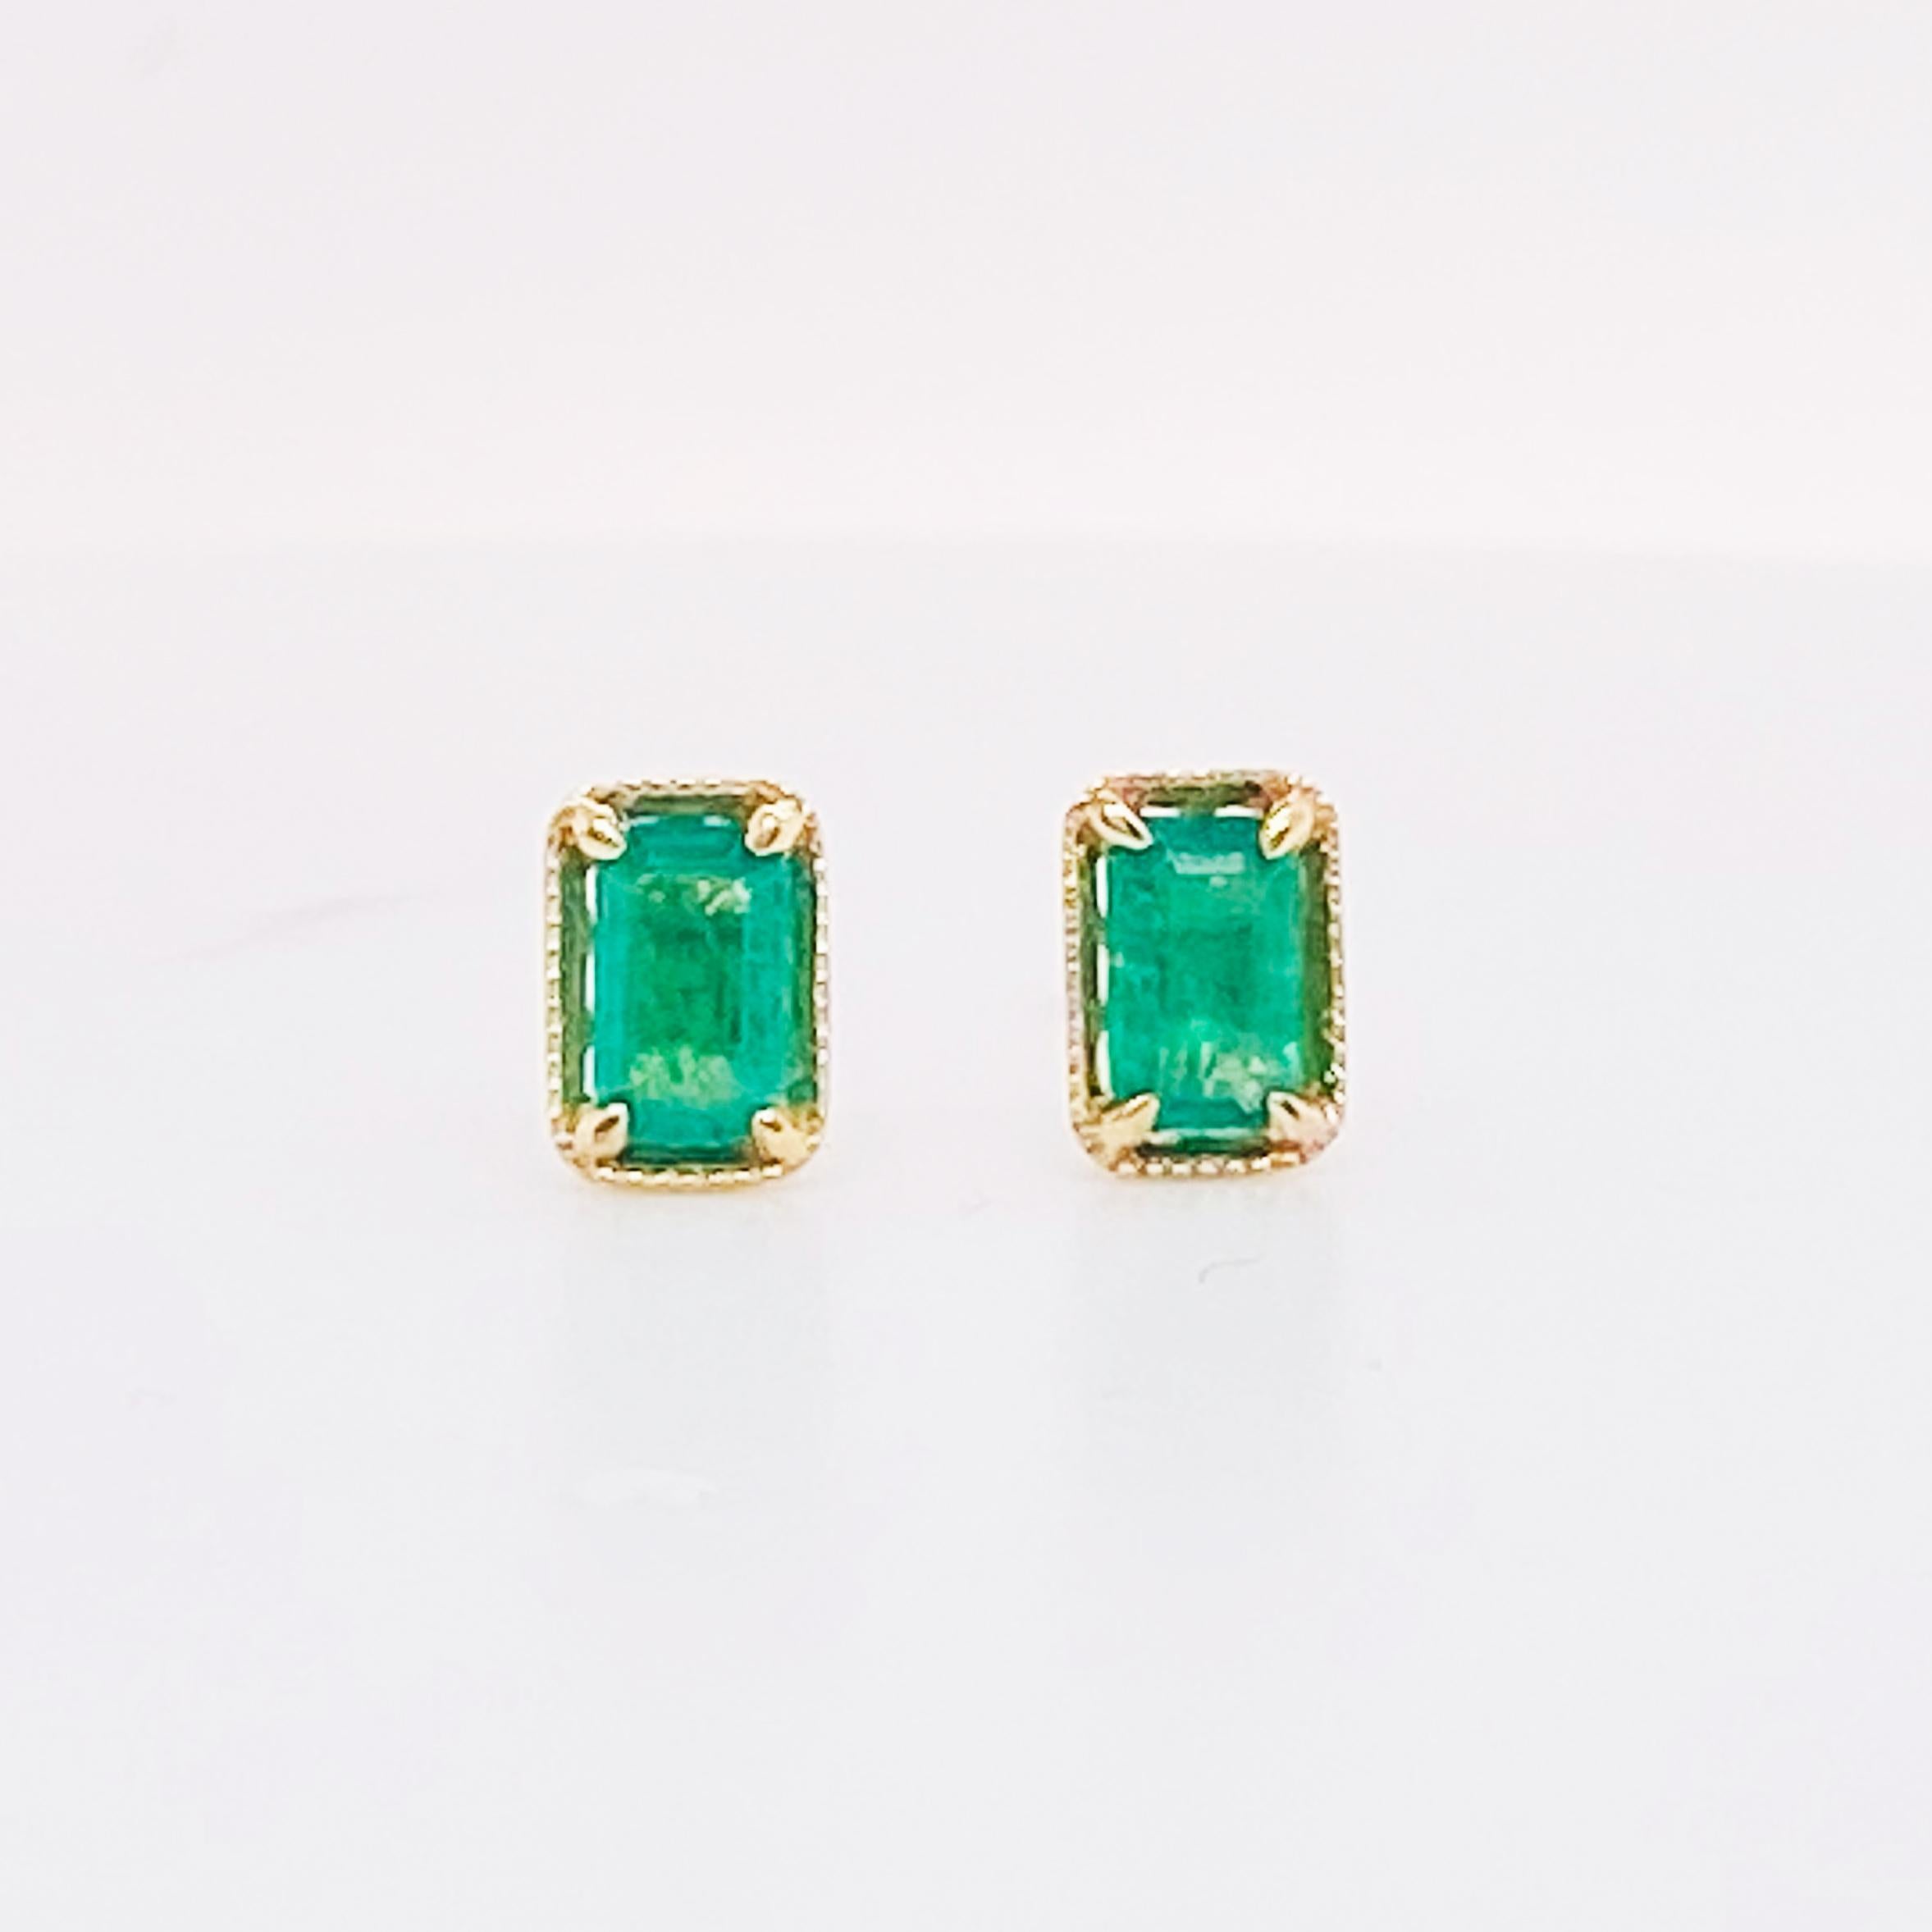 When you want post earring that POP with color these green emeralds are a must. The are small at .55 carat total weight but perfect for multiple earring party and paired with other stud or hoop earrings.
Material: 14K Gold
Emerald Weight: .55